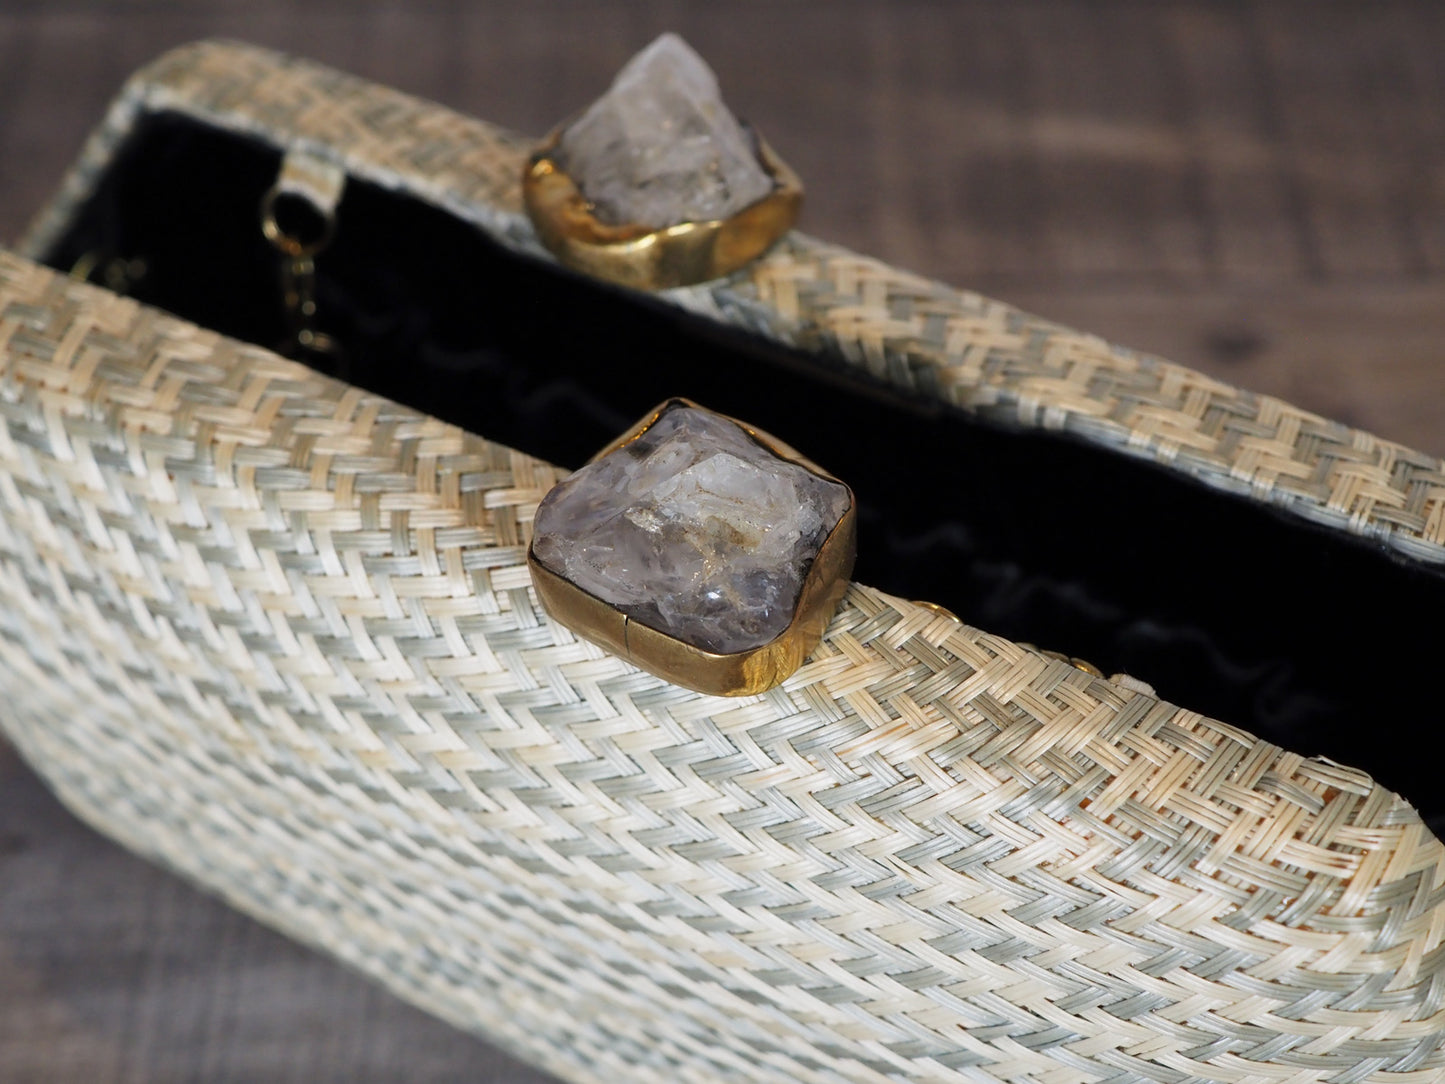 Handloomed clutch made from natural plant fibers carefully extracted from the stalks of the tropical buri palm in the Philippines and finished with a beautiful quartz stone closure. -  Shown open